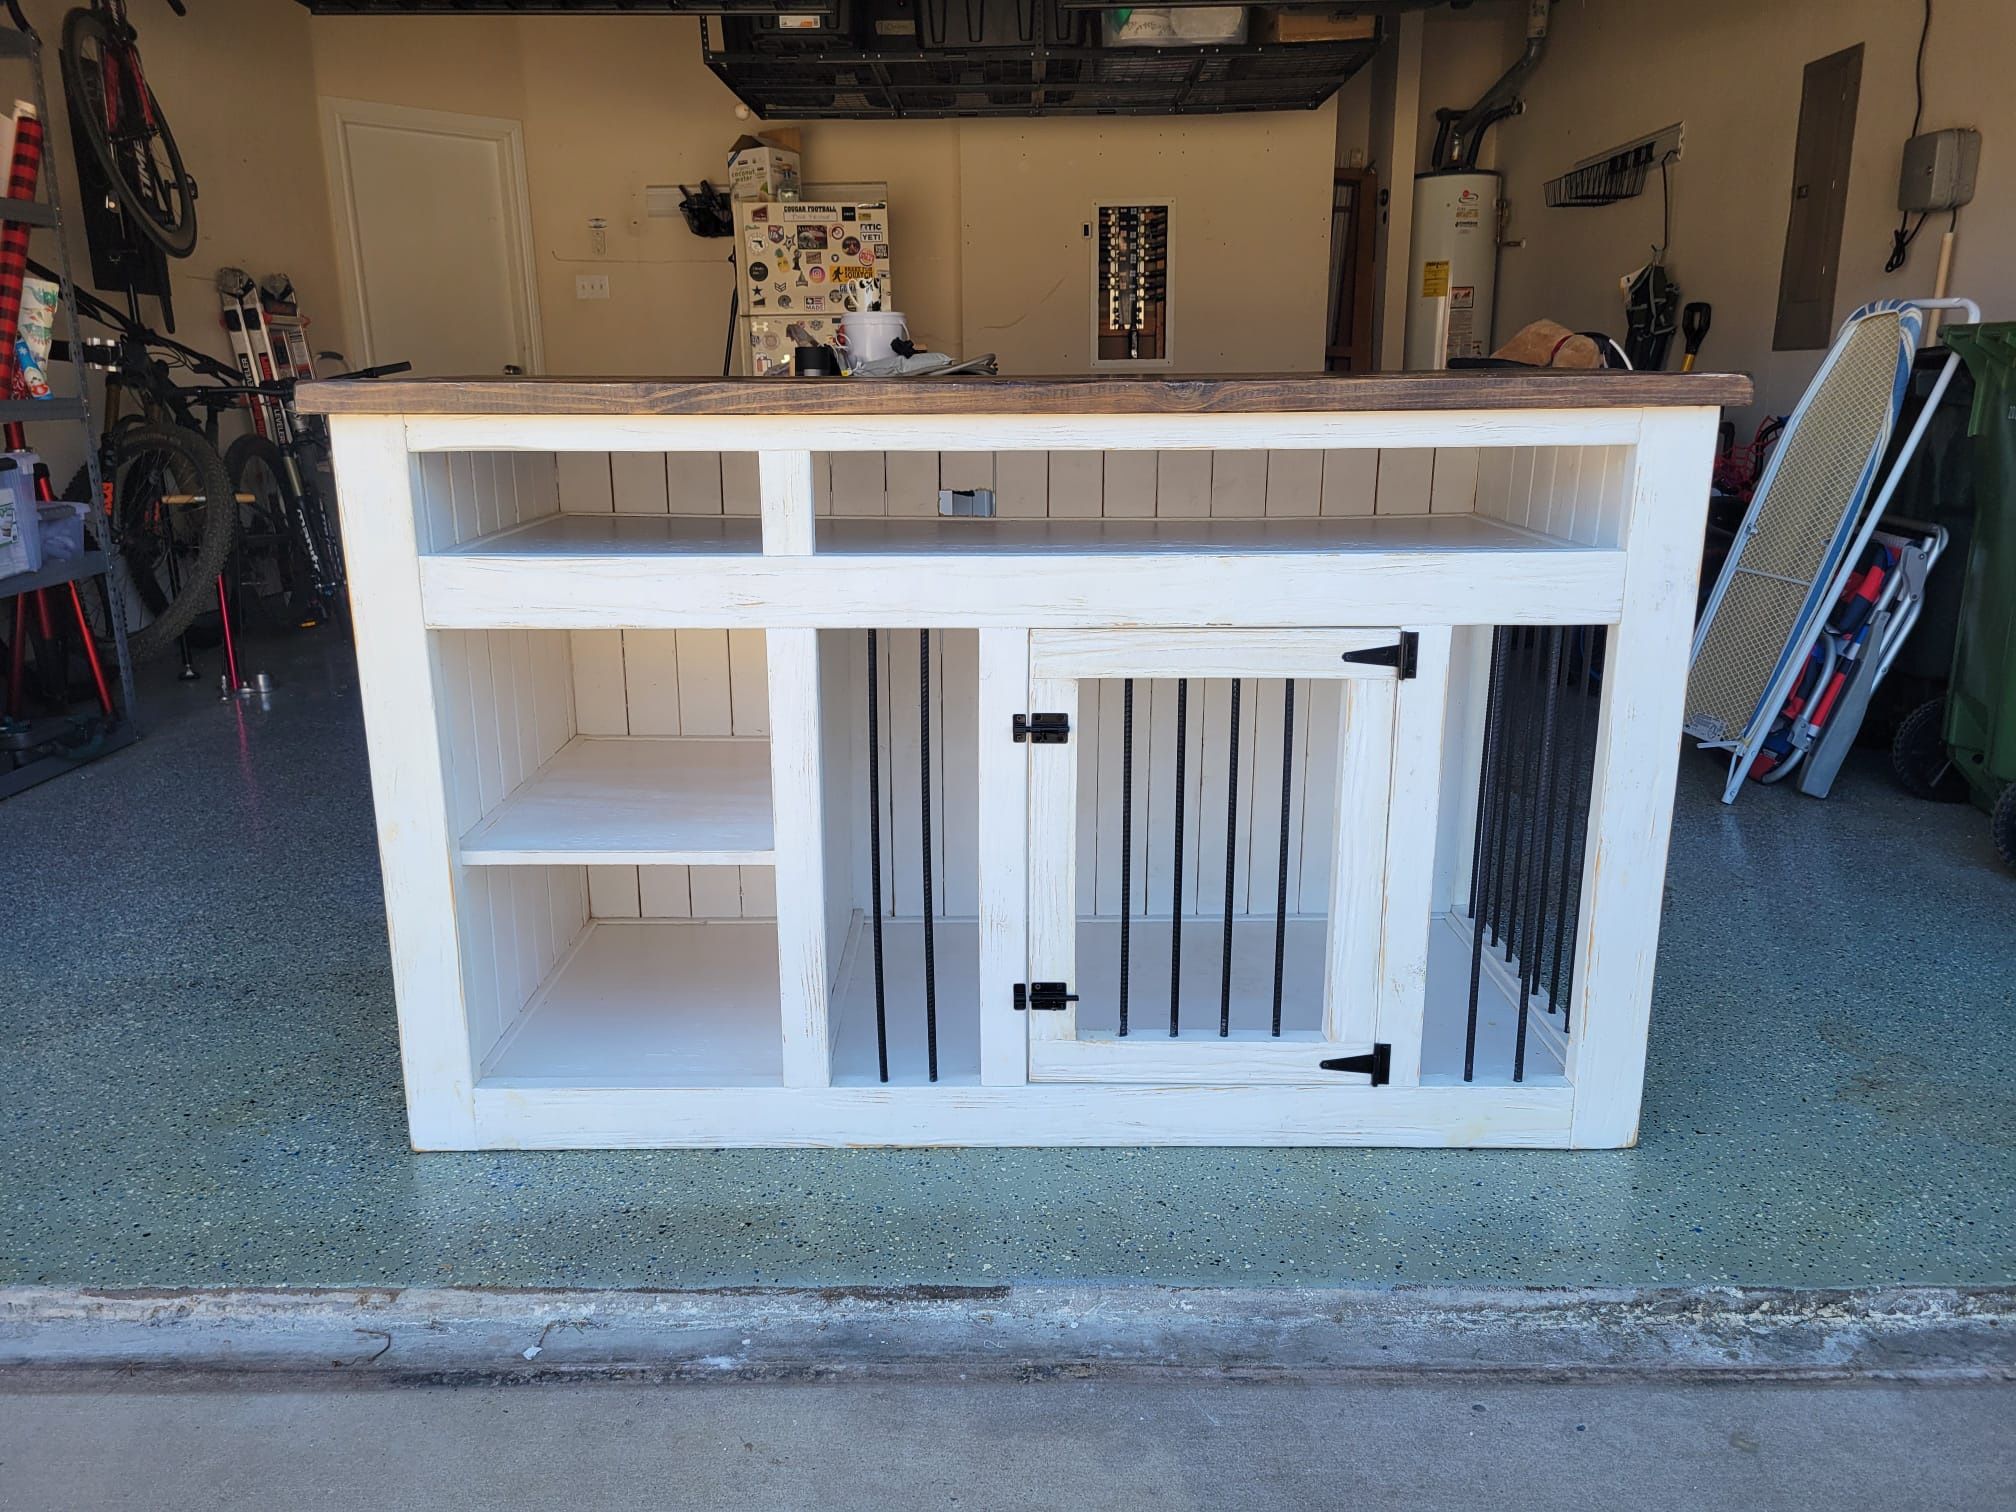 Dog Kennel Furniture/ Entertainment stand in fair condition. Cash and pickup only